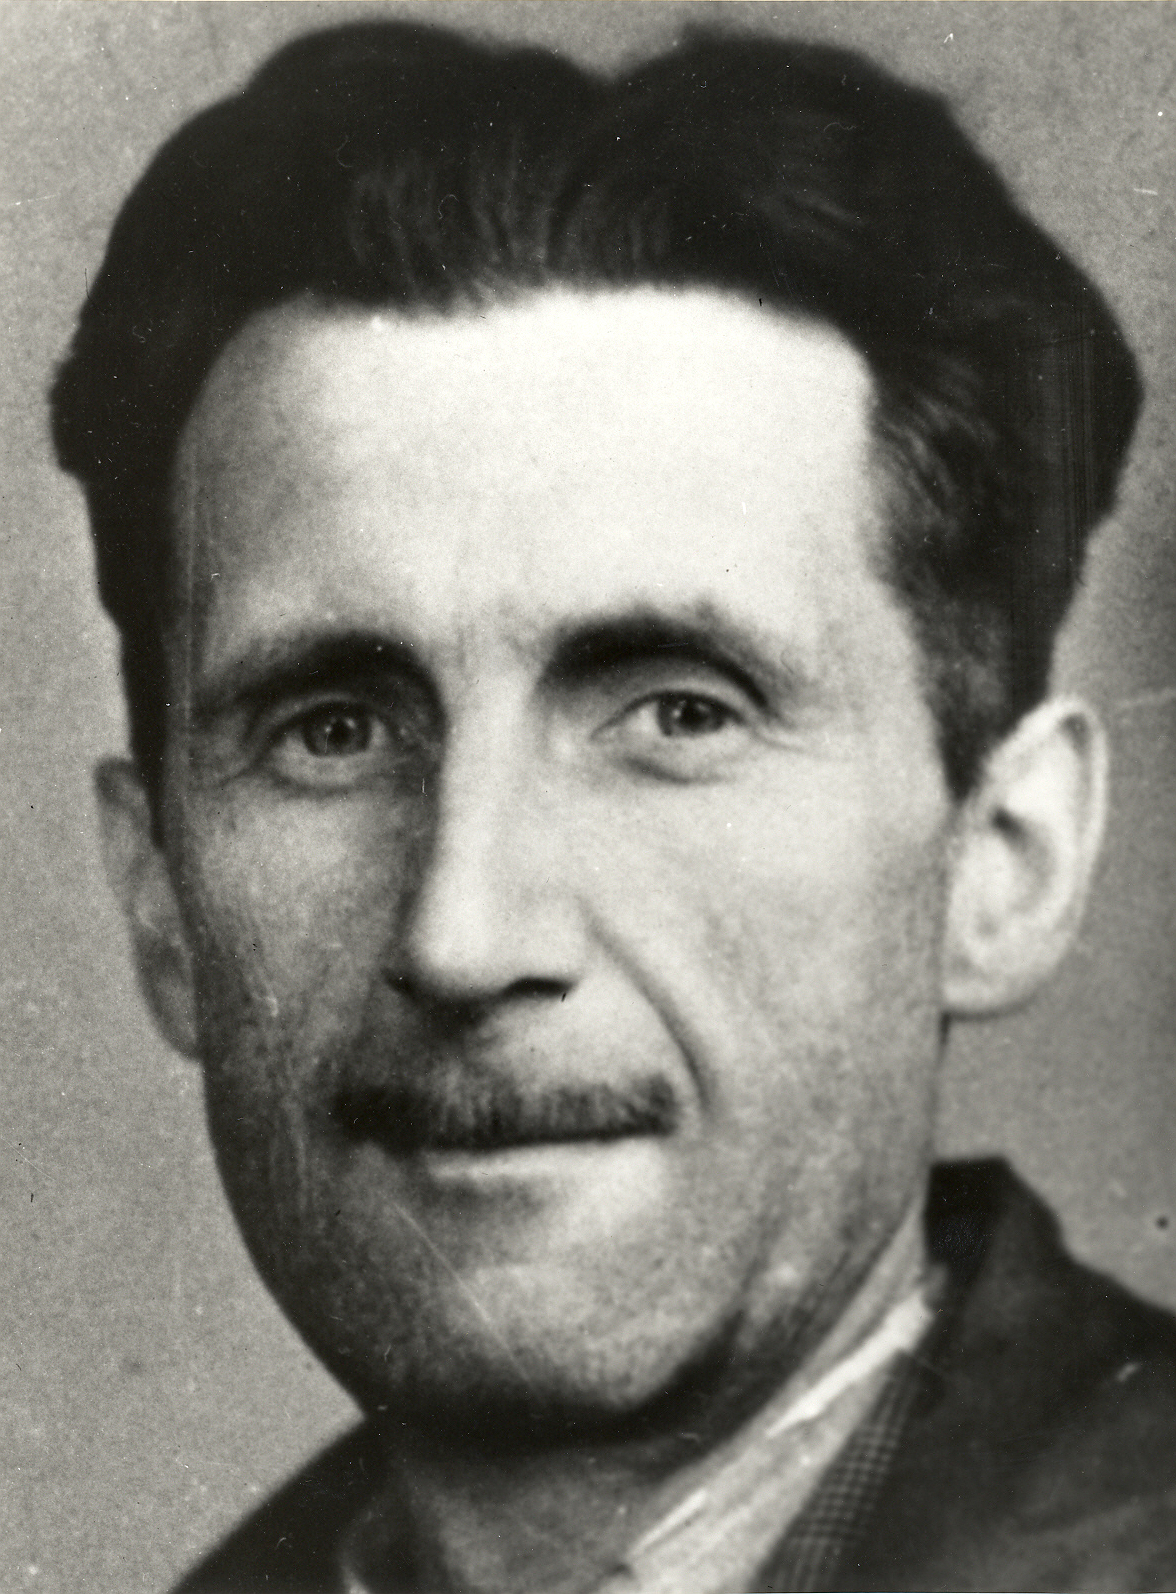 George Orwell - Pressefoto - von Branch of the National Union of Journalists (BNUJ). (http://www.netcharles.com/orwell/) [Public domain], via Wikimedia Commons